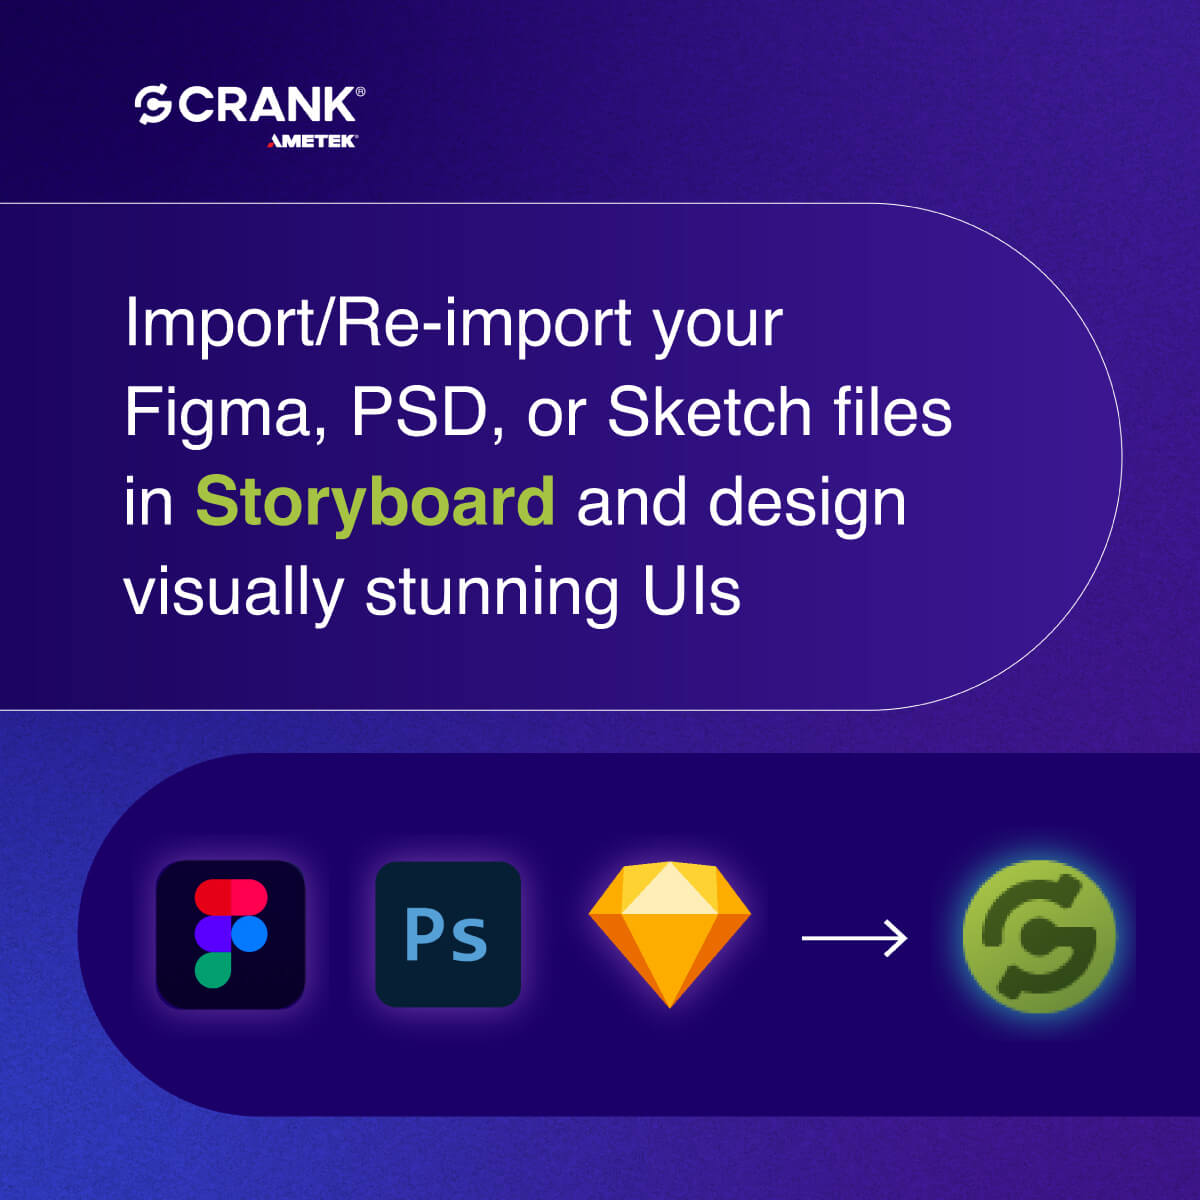 Re-import photoshop and sketch content in Storyboard